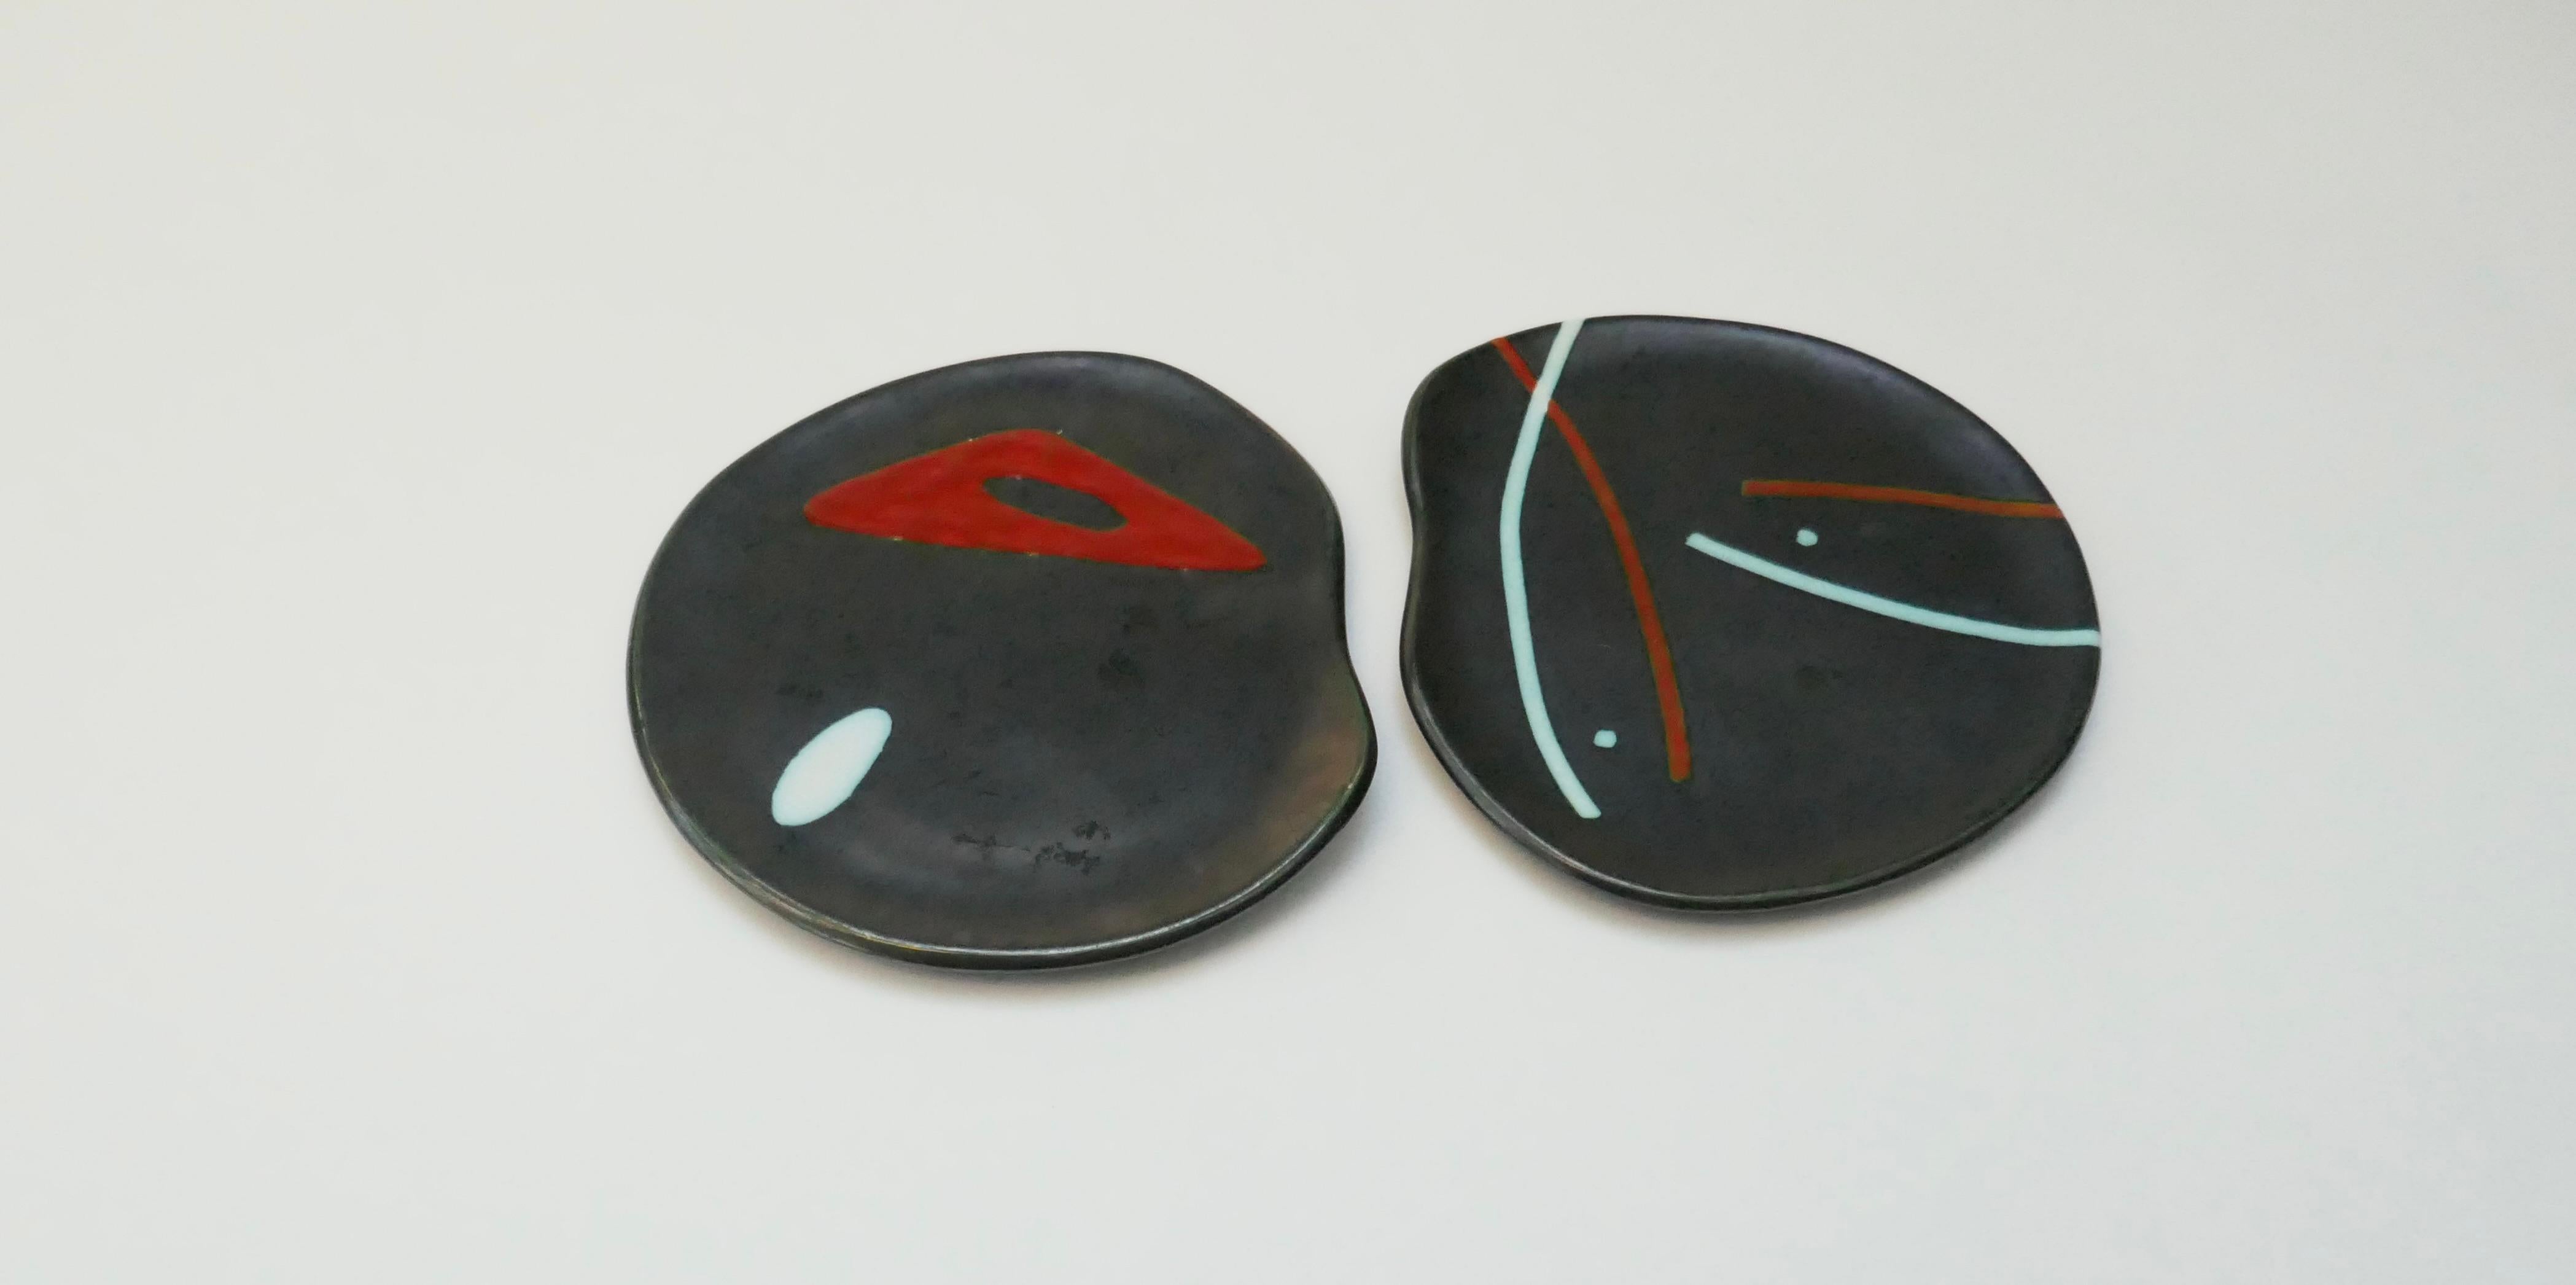 Free form Ceramic plates/dish or plaques by Peter and Denise Orlando, France 1960s. 
Glazed in black with abstract and geometric decoration engraved and over-glazed in shiny terracotta and light blue. Heavy ceramic characteristic of the work of D &